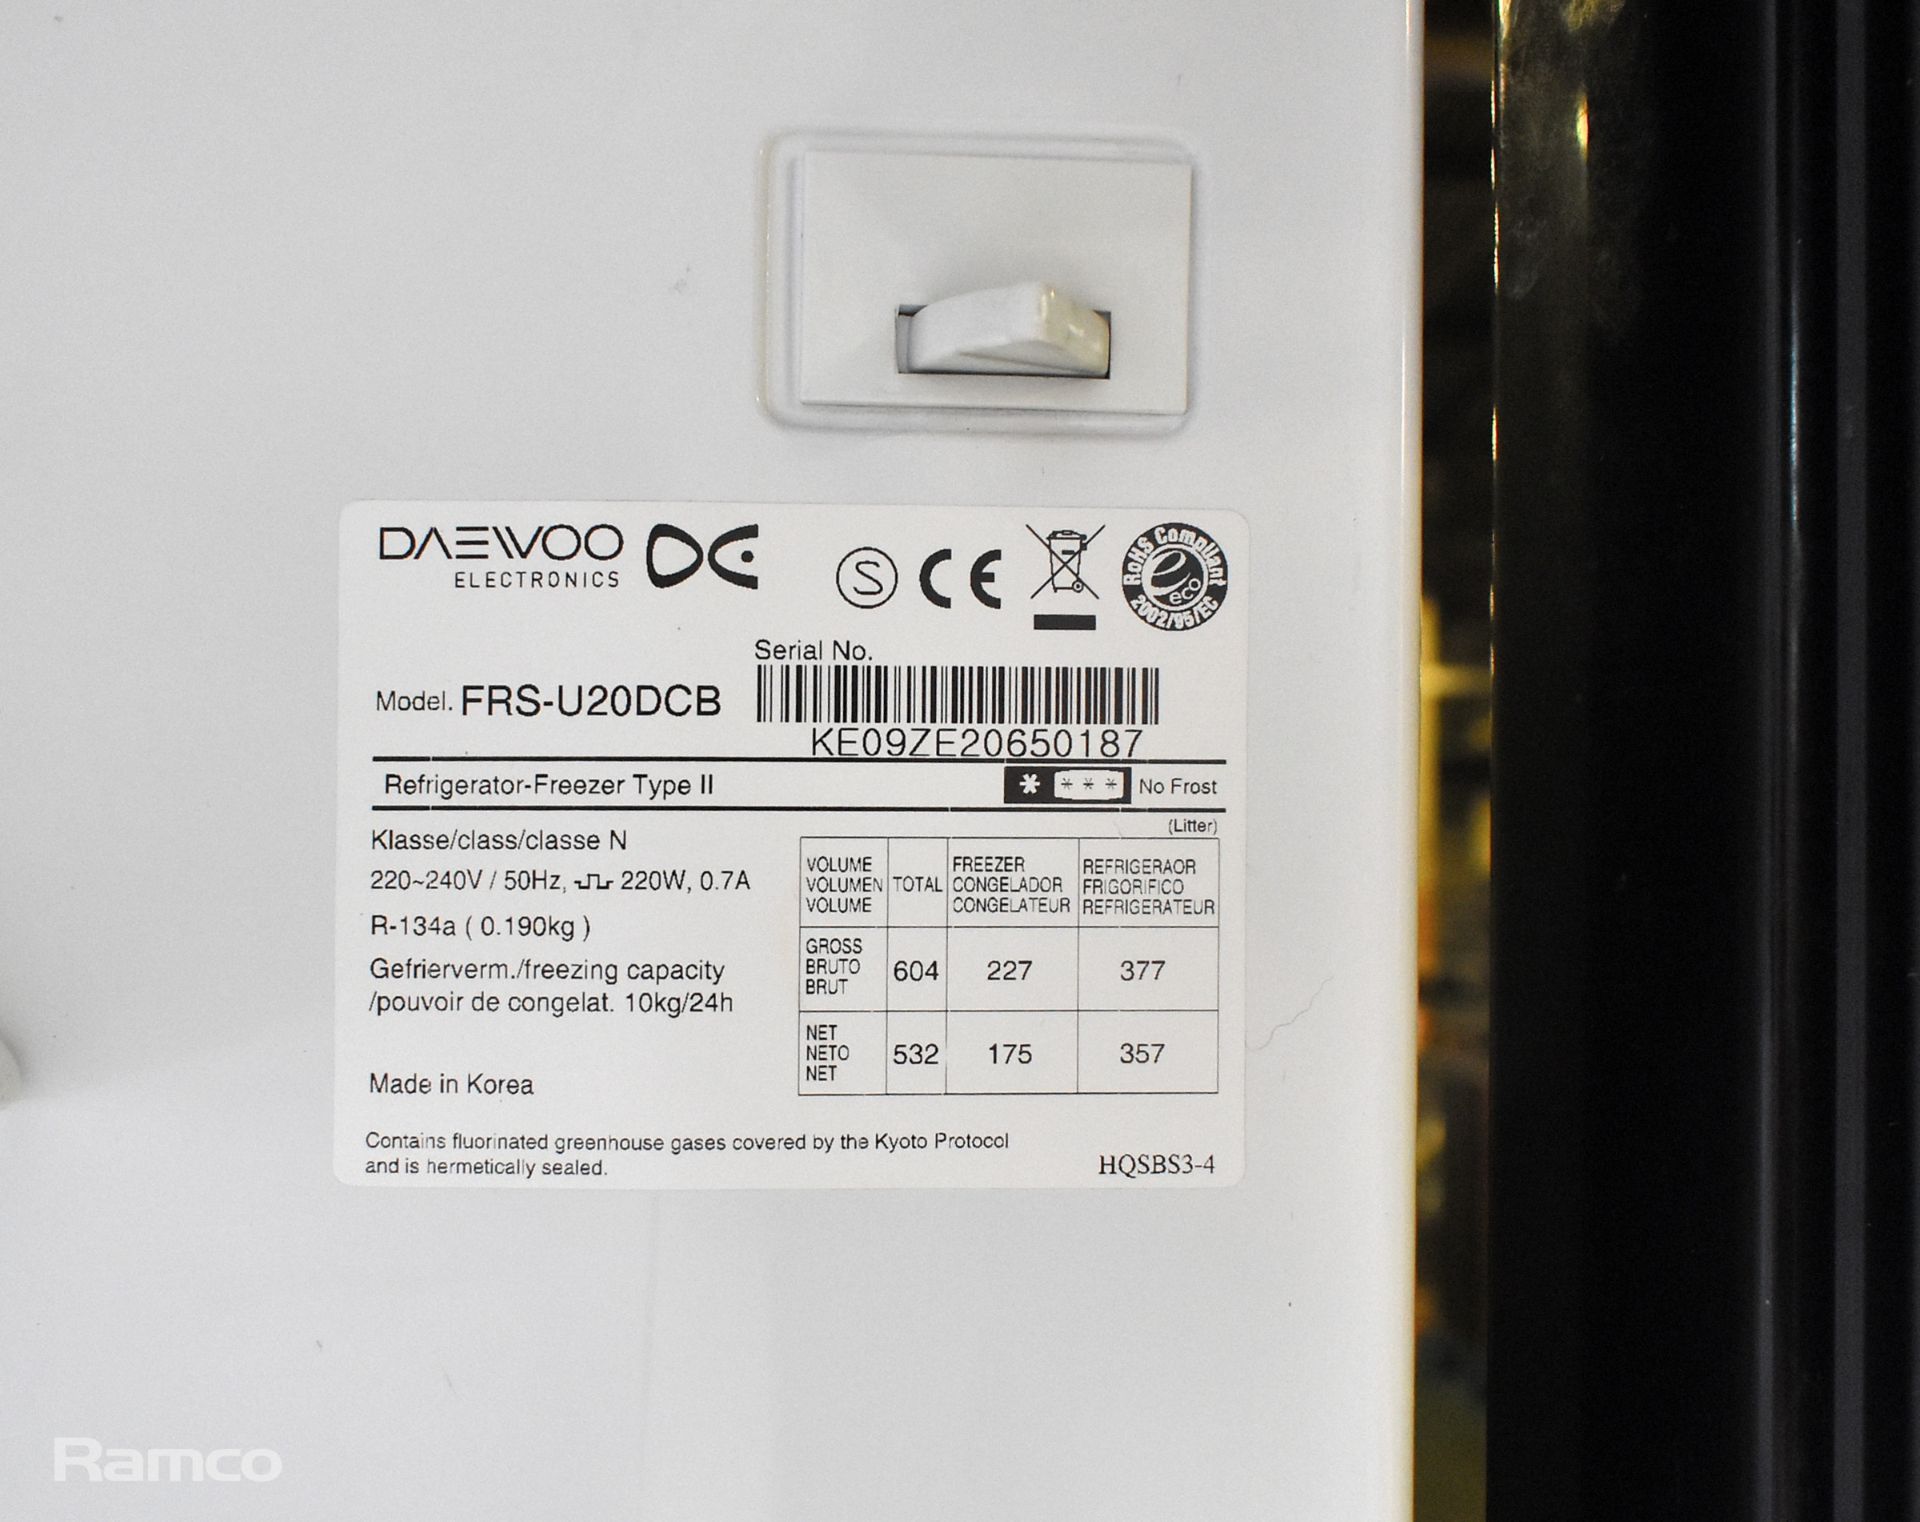 Daewoo FRS-U20DCB Double door refrigerator with ice maker - W 900 x D 670 x H 1780mm - Image 5 of 9